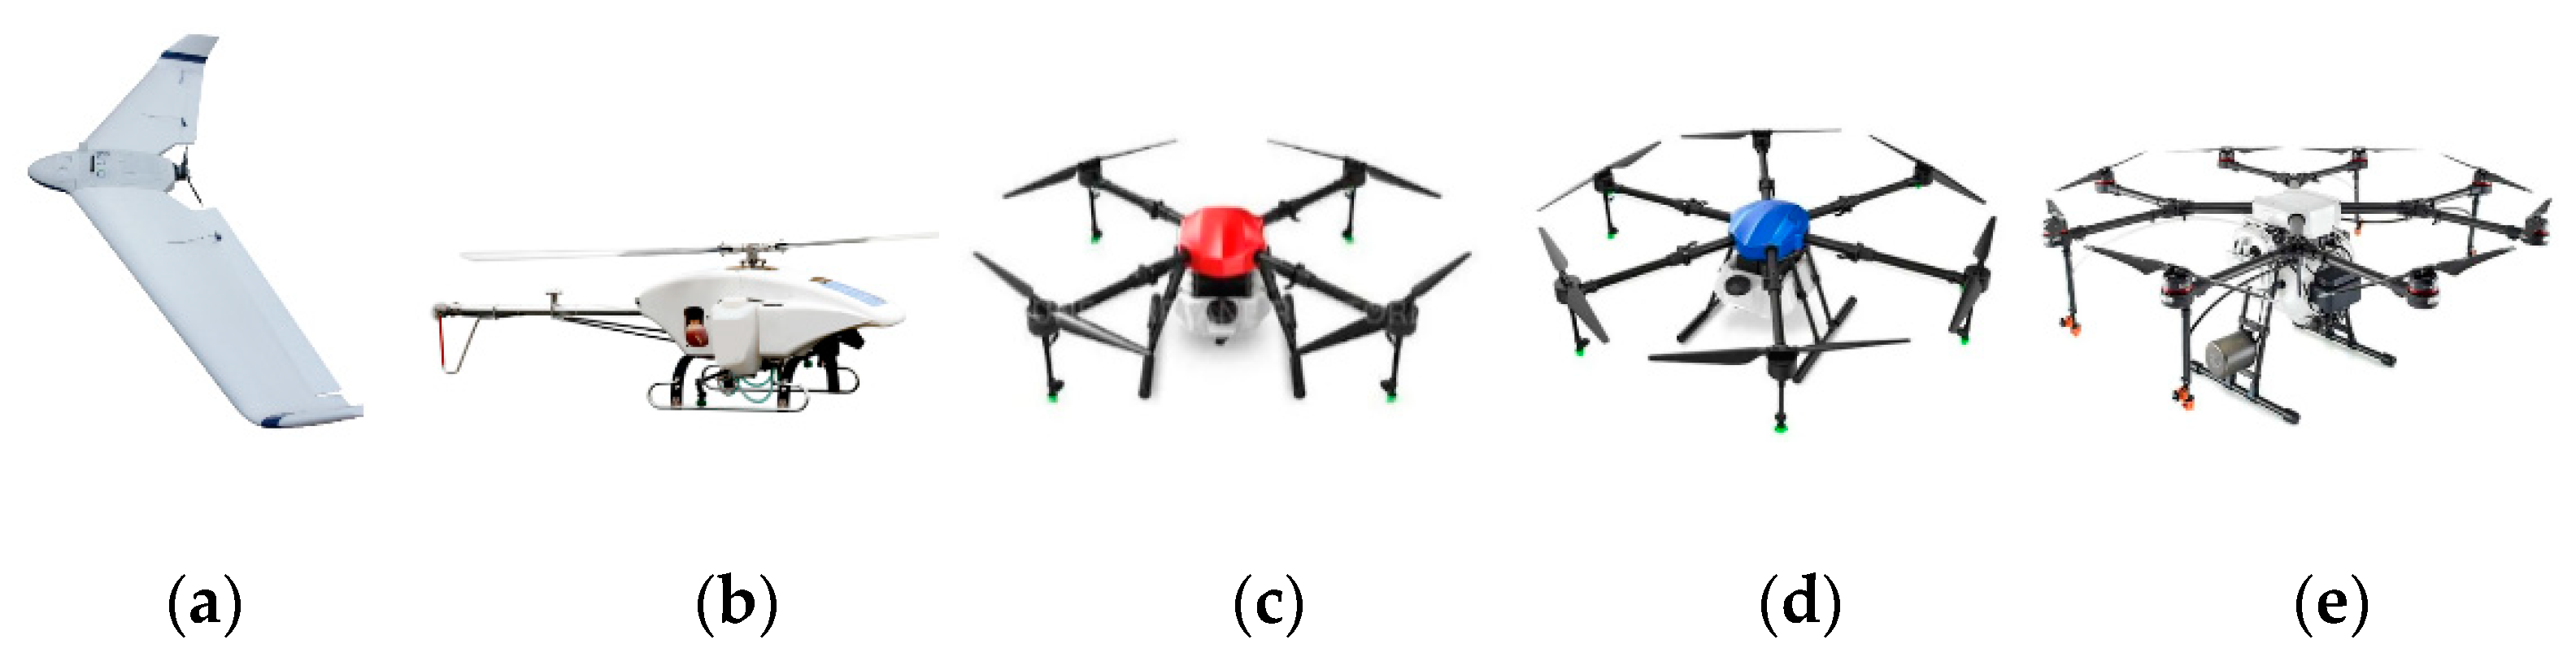 Drones | Free Full-Text | Independent Control Spraying System for UAV-Based Precise Variable Sprayer: Review